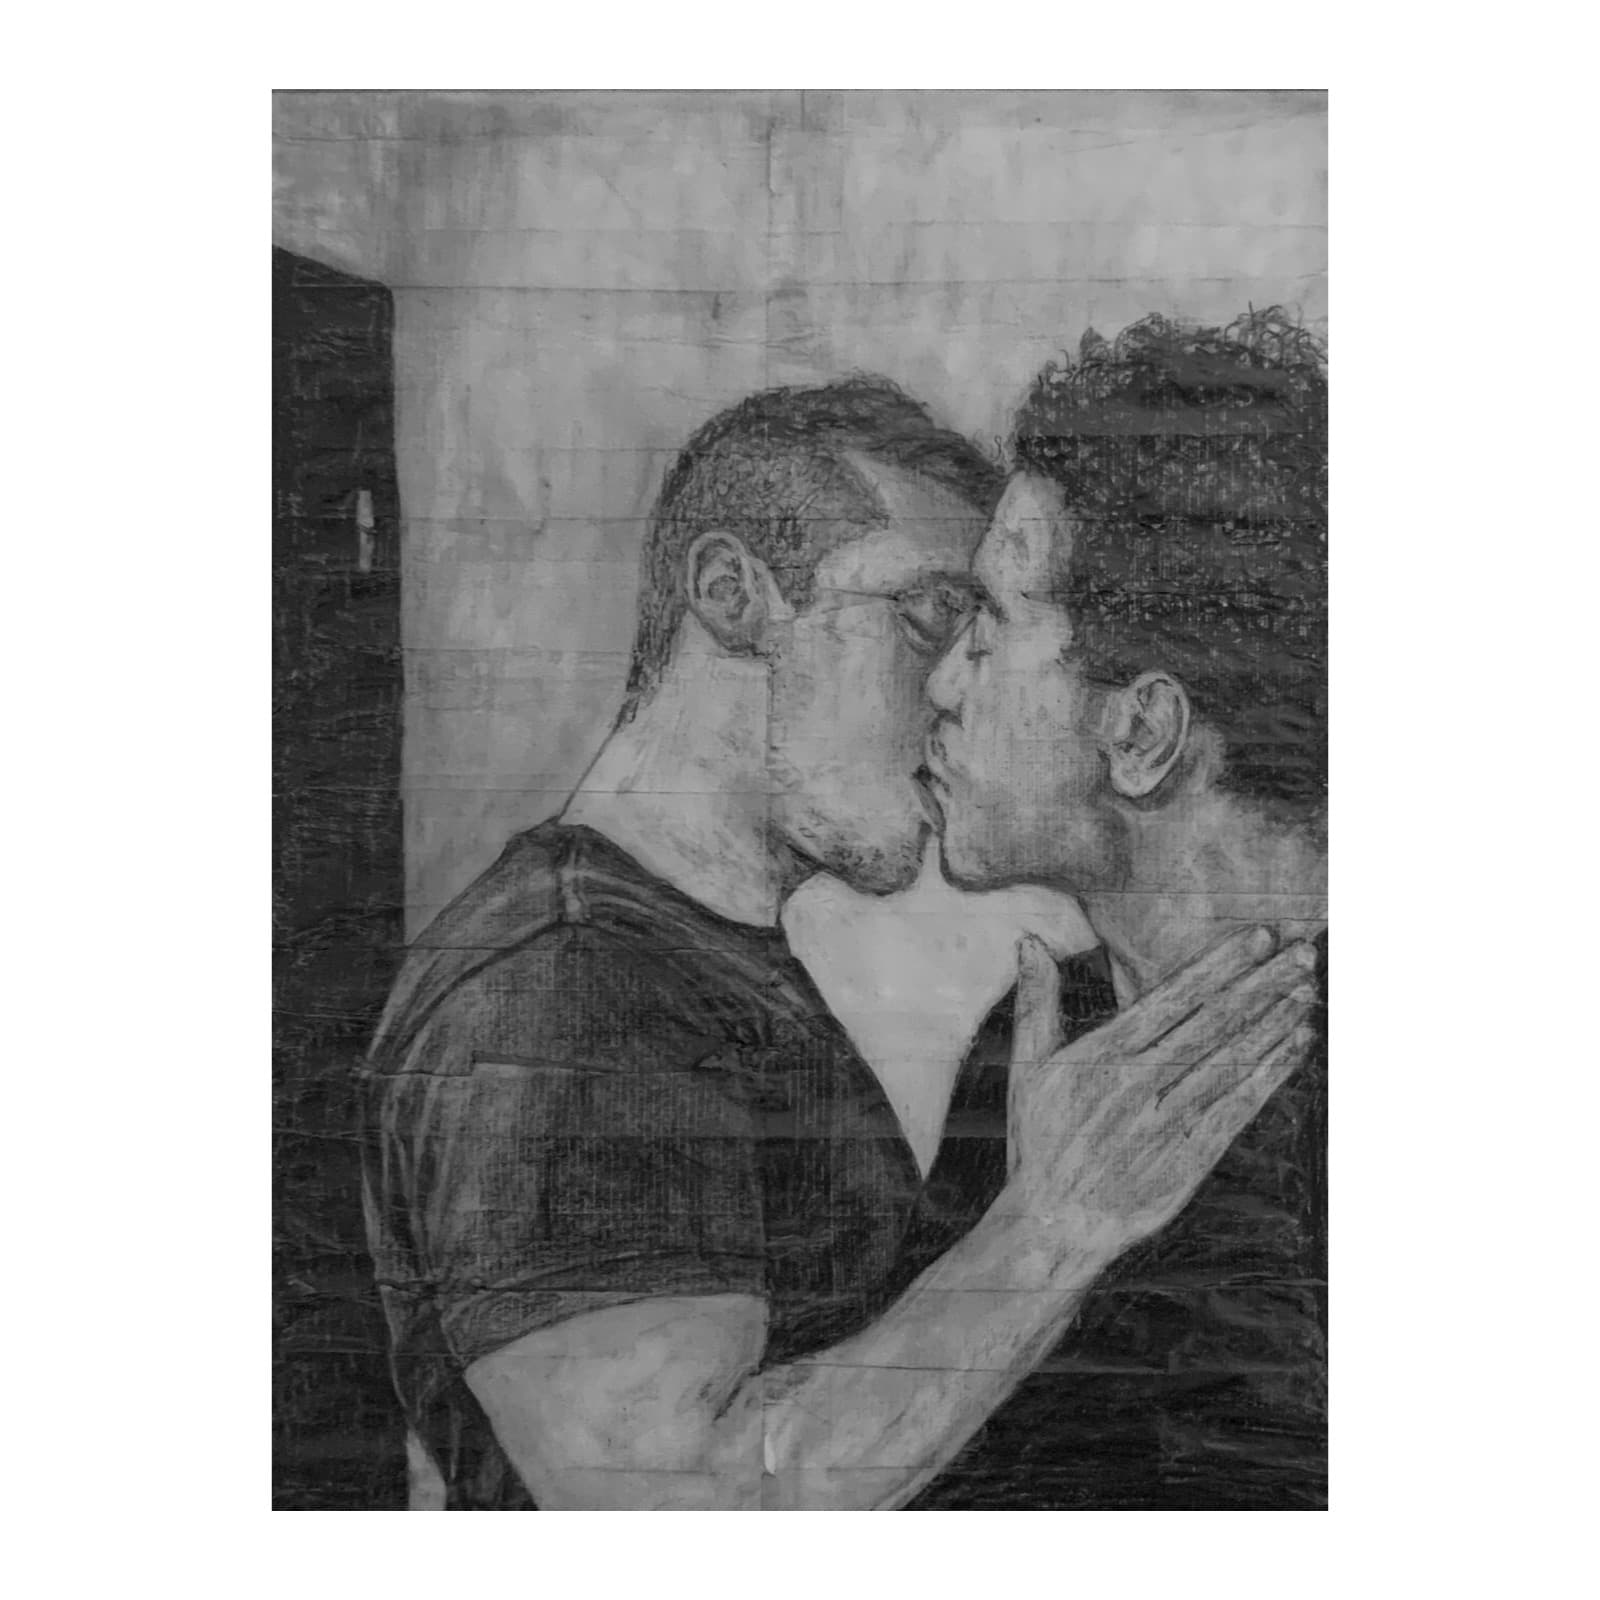 There is never more than a fag paper between them - Greg and Noah- Pencil Artwork on Cigarette Paper